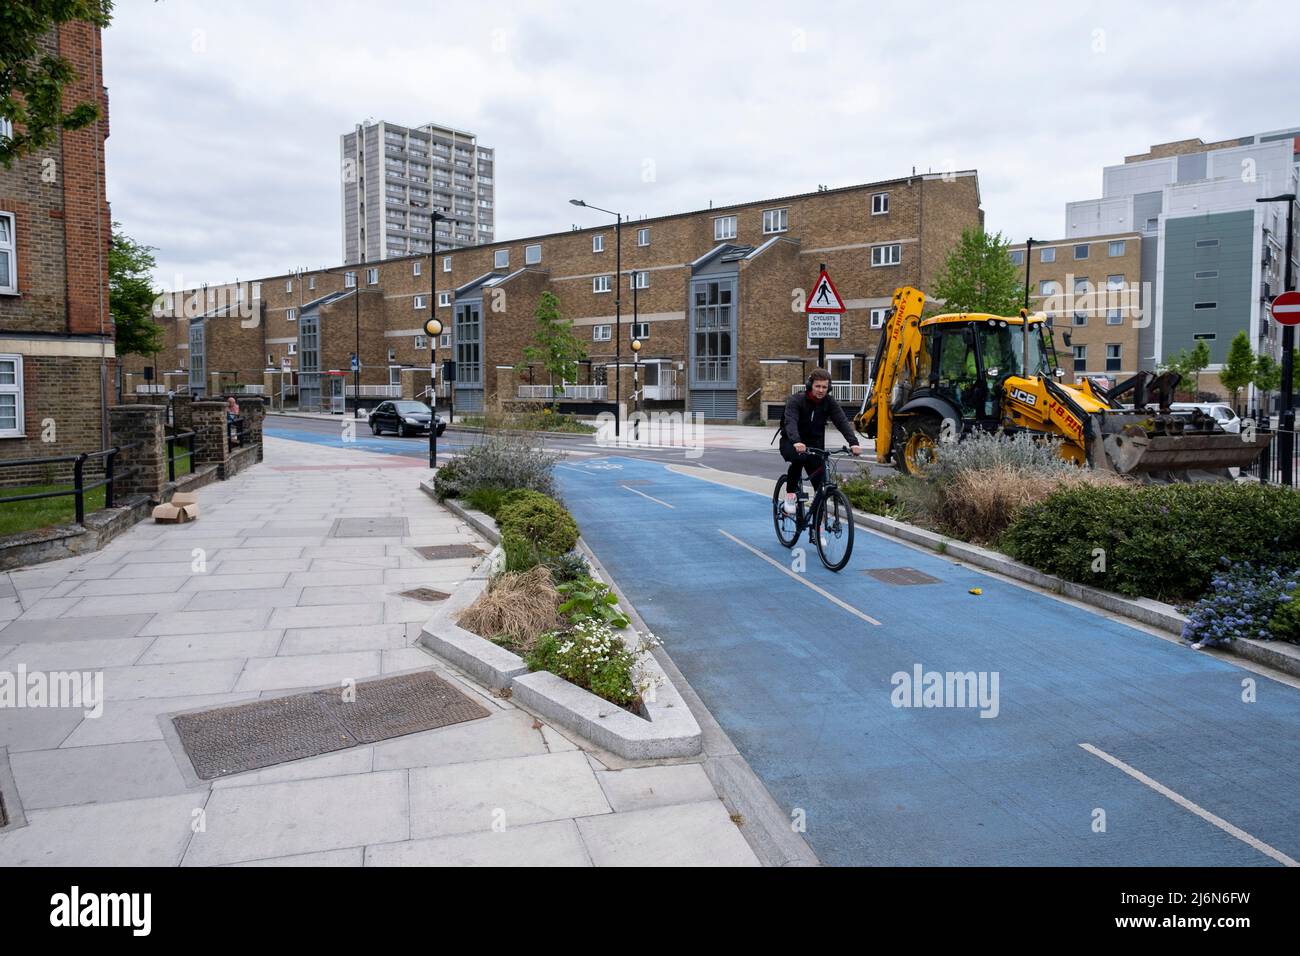 Cycle lane in Shadwell on 27th April 2022 in London, United Kingdom. Cycle Superhighway 3 or CS3 is a long cycle path and part of the Cycleway network coordinated by TfL. It runs from east to central London. It is a popular route with both commuter and leisure cyclists, passing a number of major destinations in London along its route. For almost the entire route, cyclists are separated from other traffic in segregated cycle lanes, and cycling infrastructure has been provided at major interchanges. CS3 has now been renamed to Cycleway 3 or C3. Stock Photo